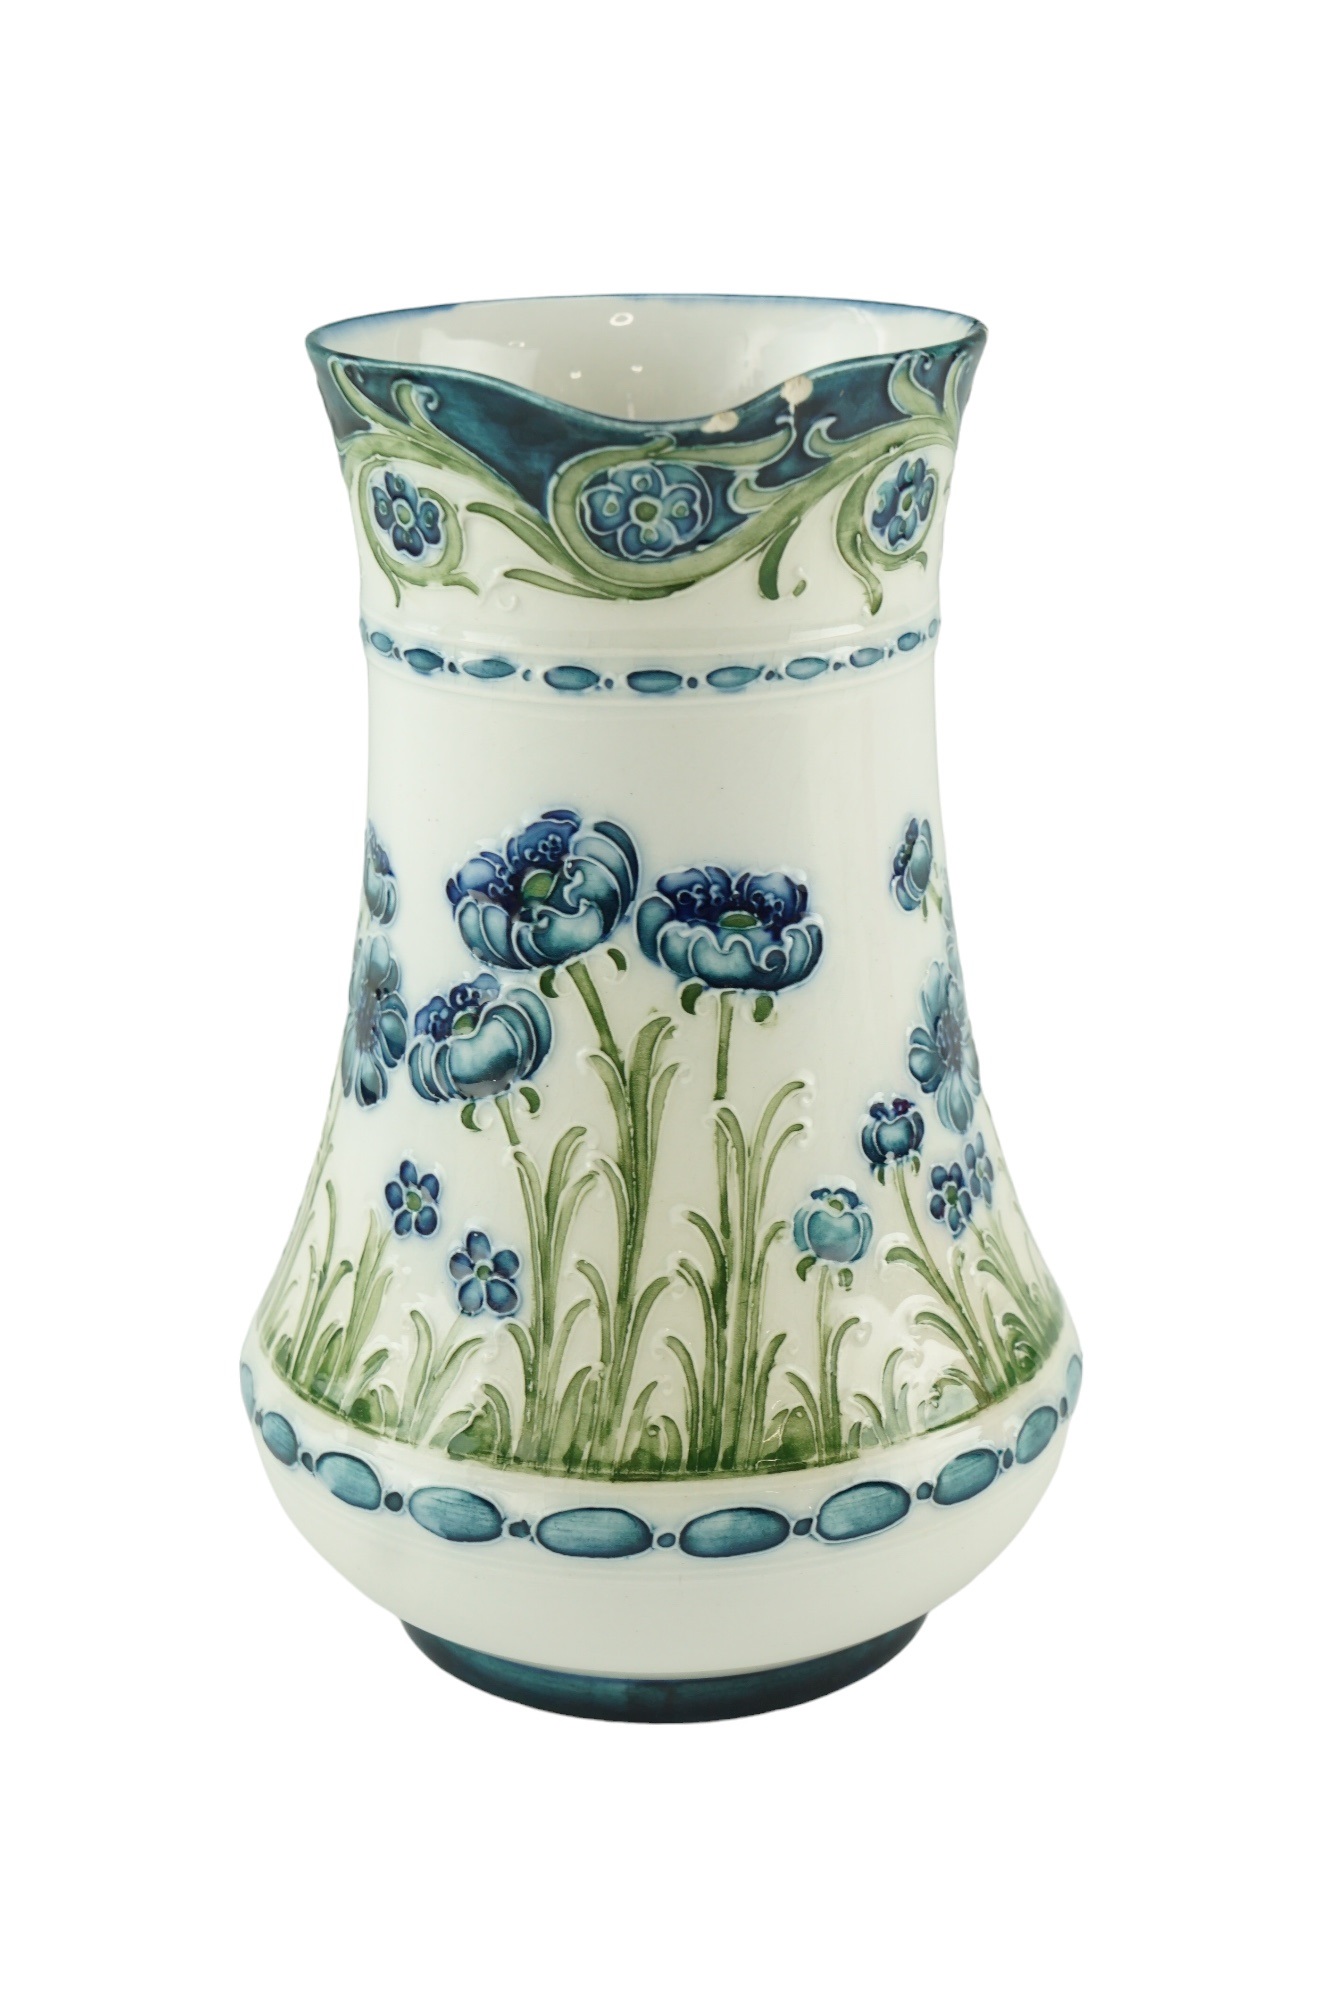 An early 20th Century William Moorcroft / James Macintyre & Co Florian Ware jug, having blue and - Image 3 of 7